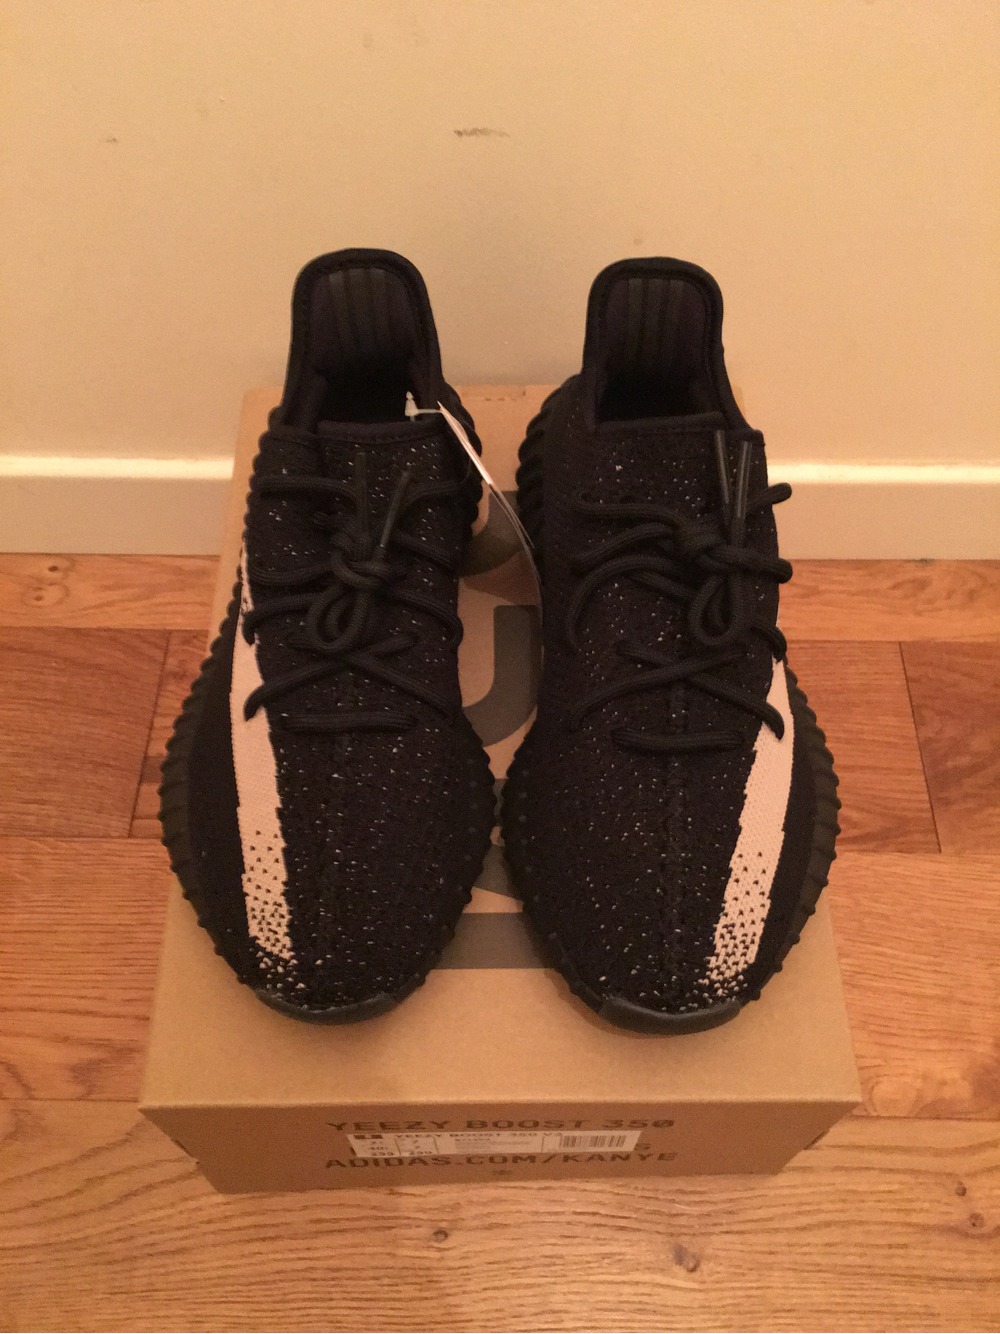 Fans who queued days for Kanye's adidas Yeezy 350 trainers are sent 